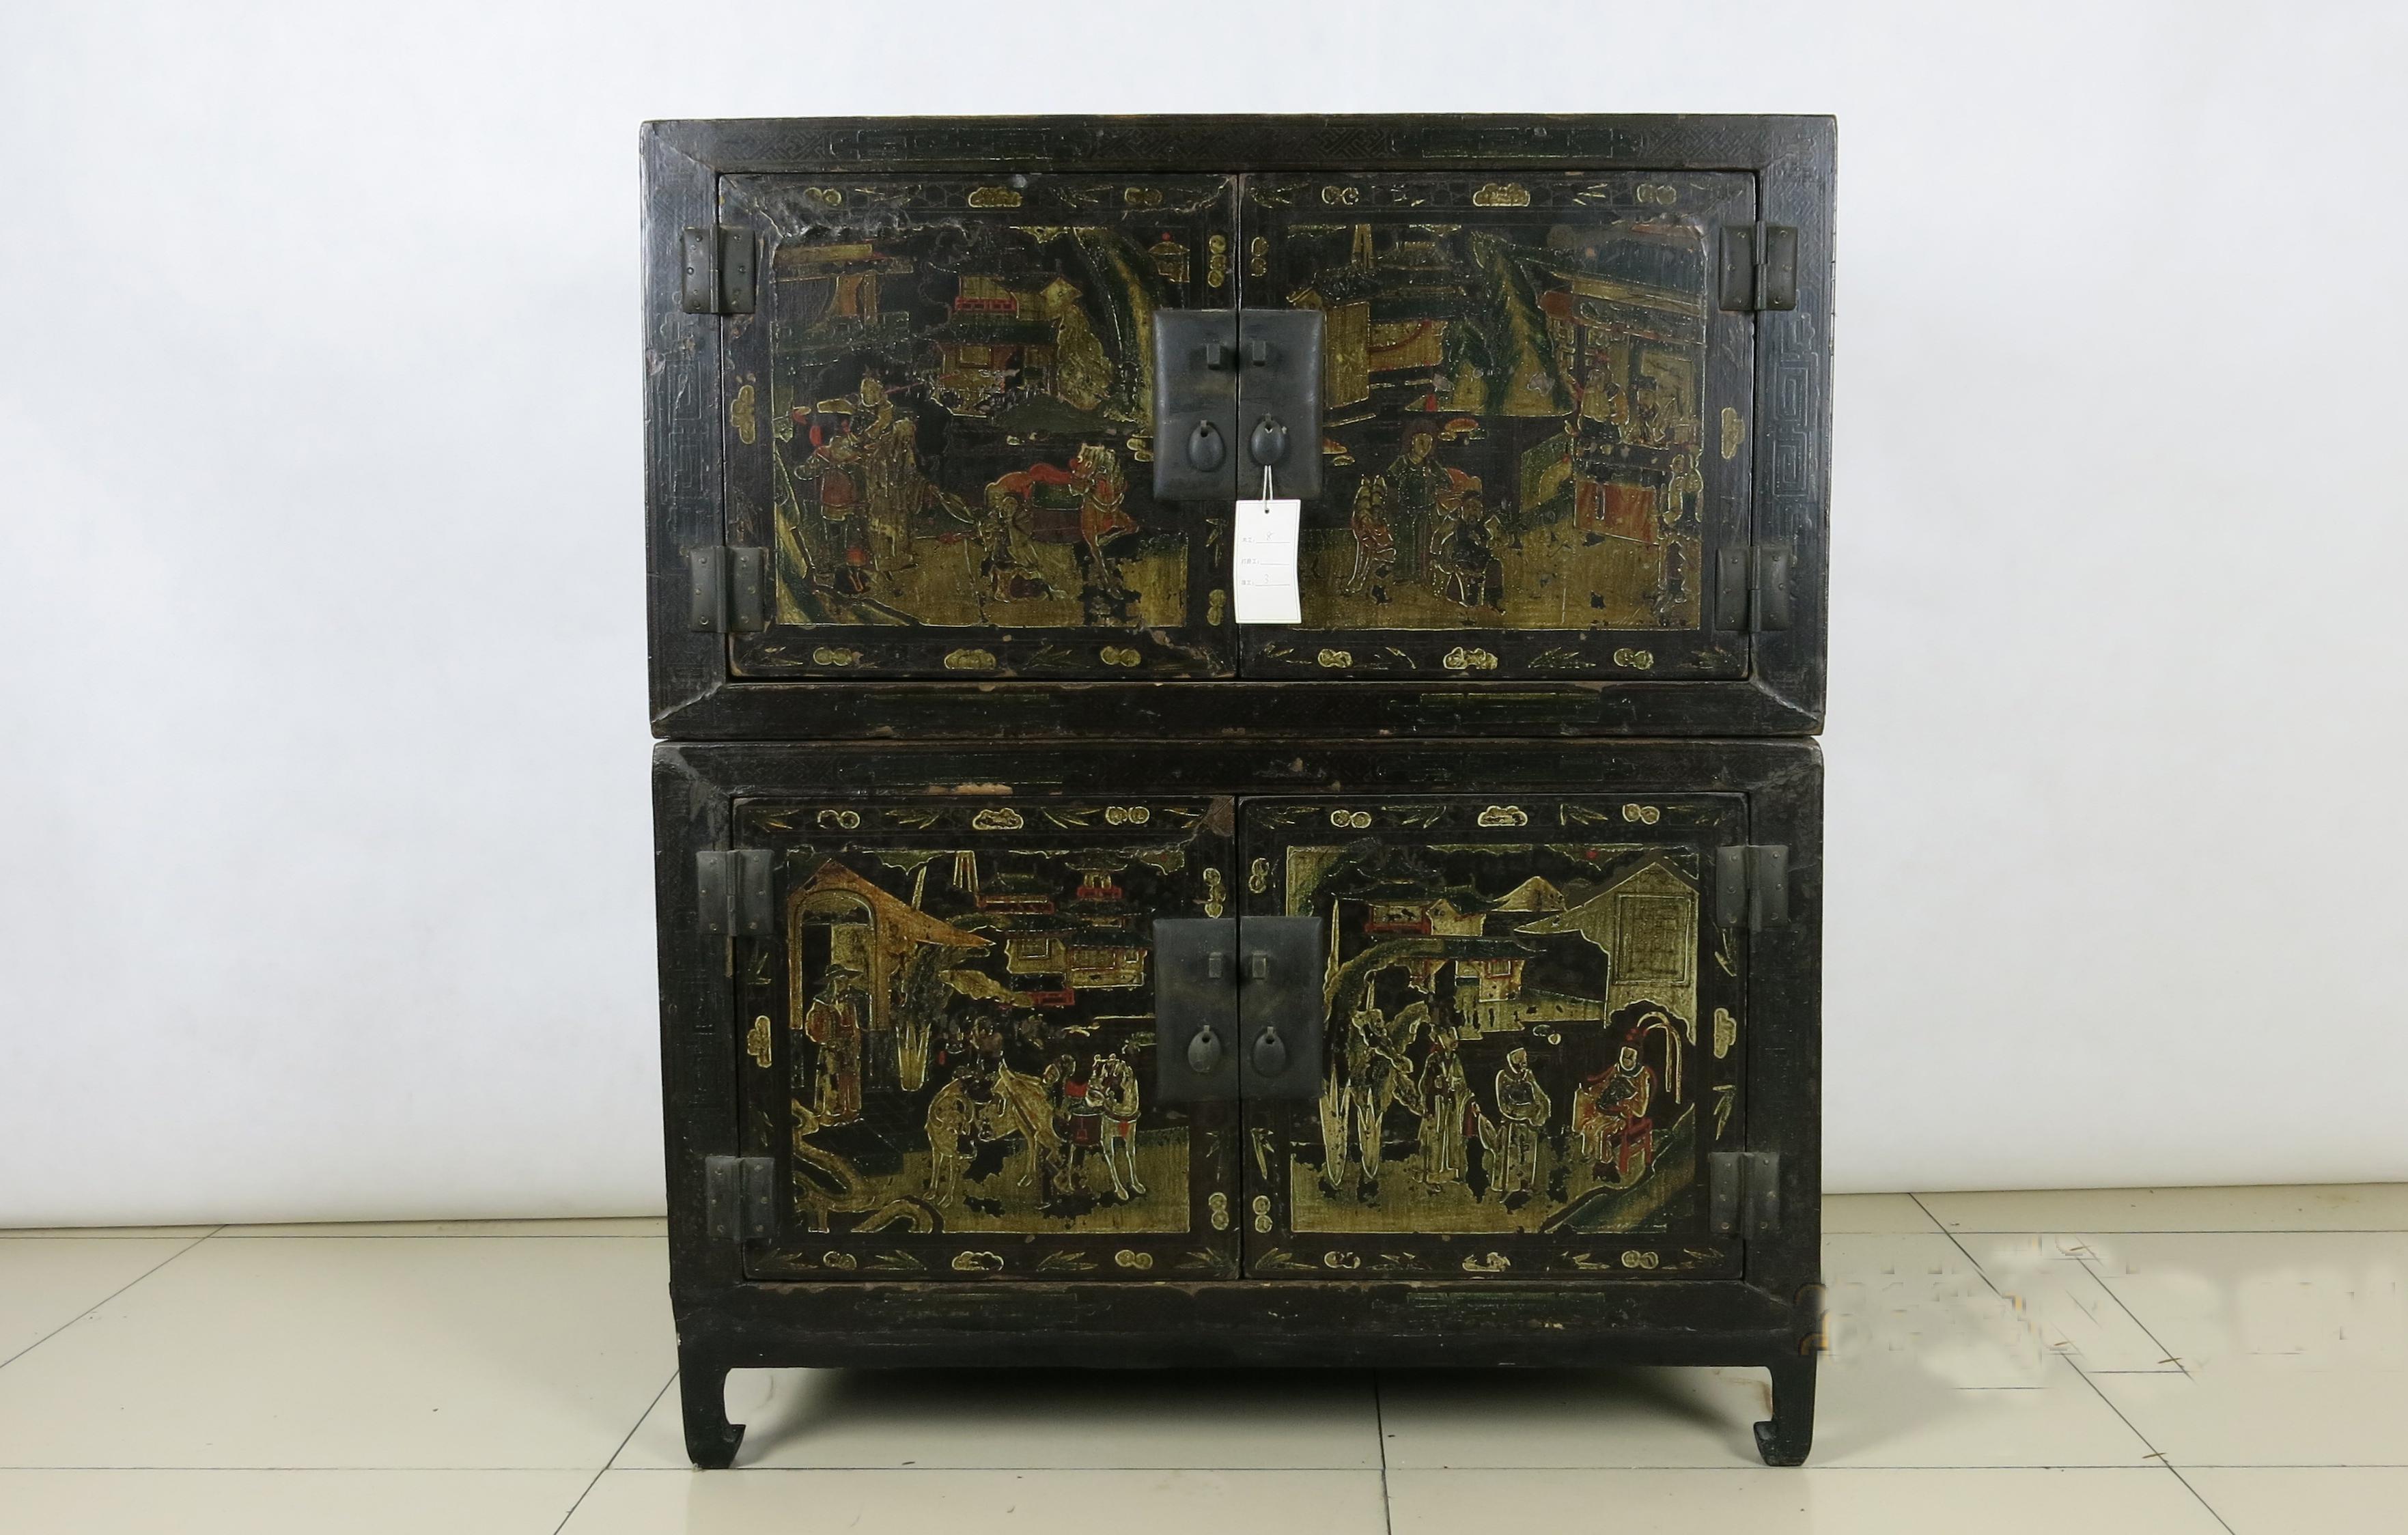 This black lacquer with gilt paint doors is a cabinet made of two separate cabinets. The lower cabinet has four carved horse hoof legs. The top cabinet can be placed on the top of the lower cabinet or used as a separate accent table. No matter how